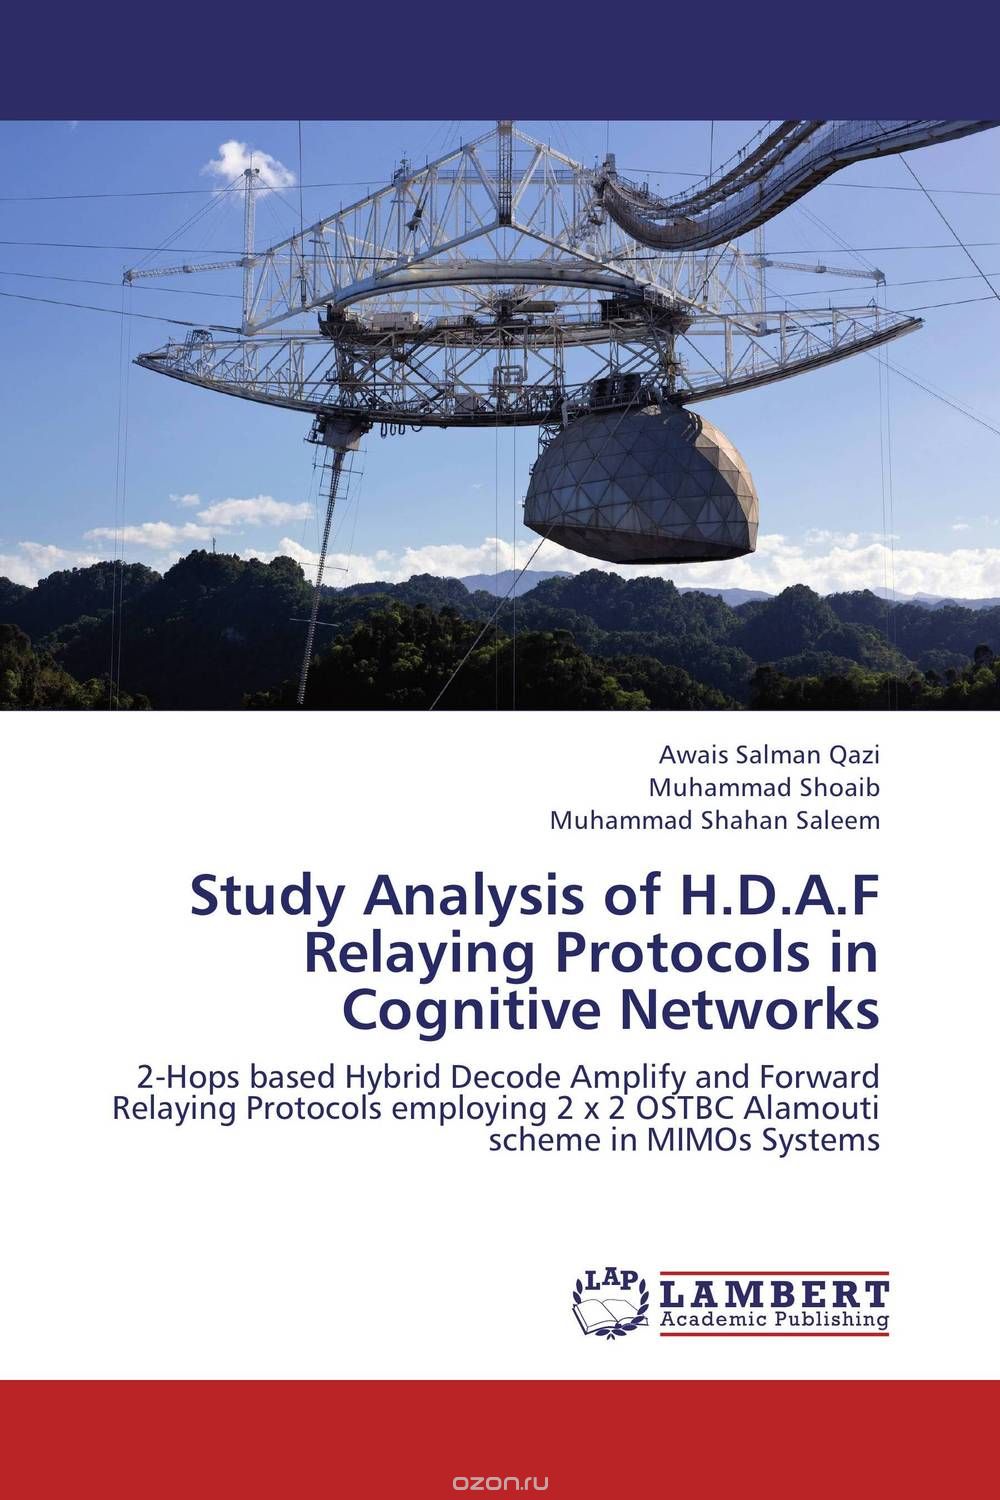 Study Analysis of H.D.A.F Relaying Protocols in Cognitive Networks